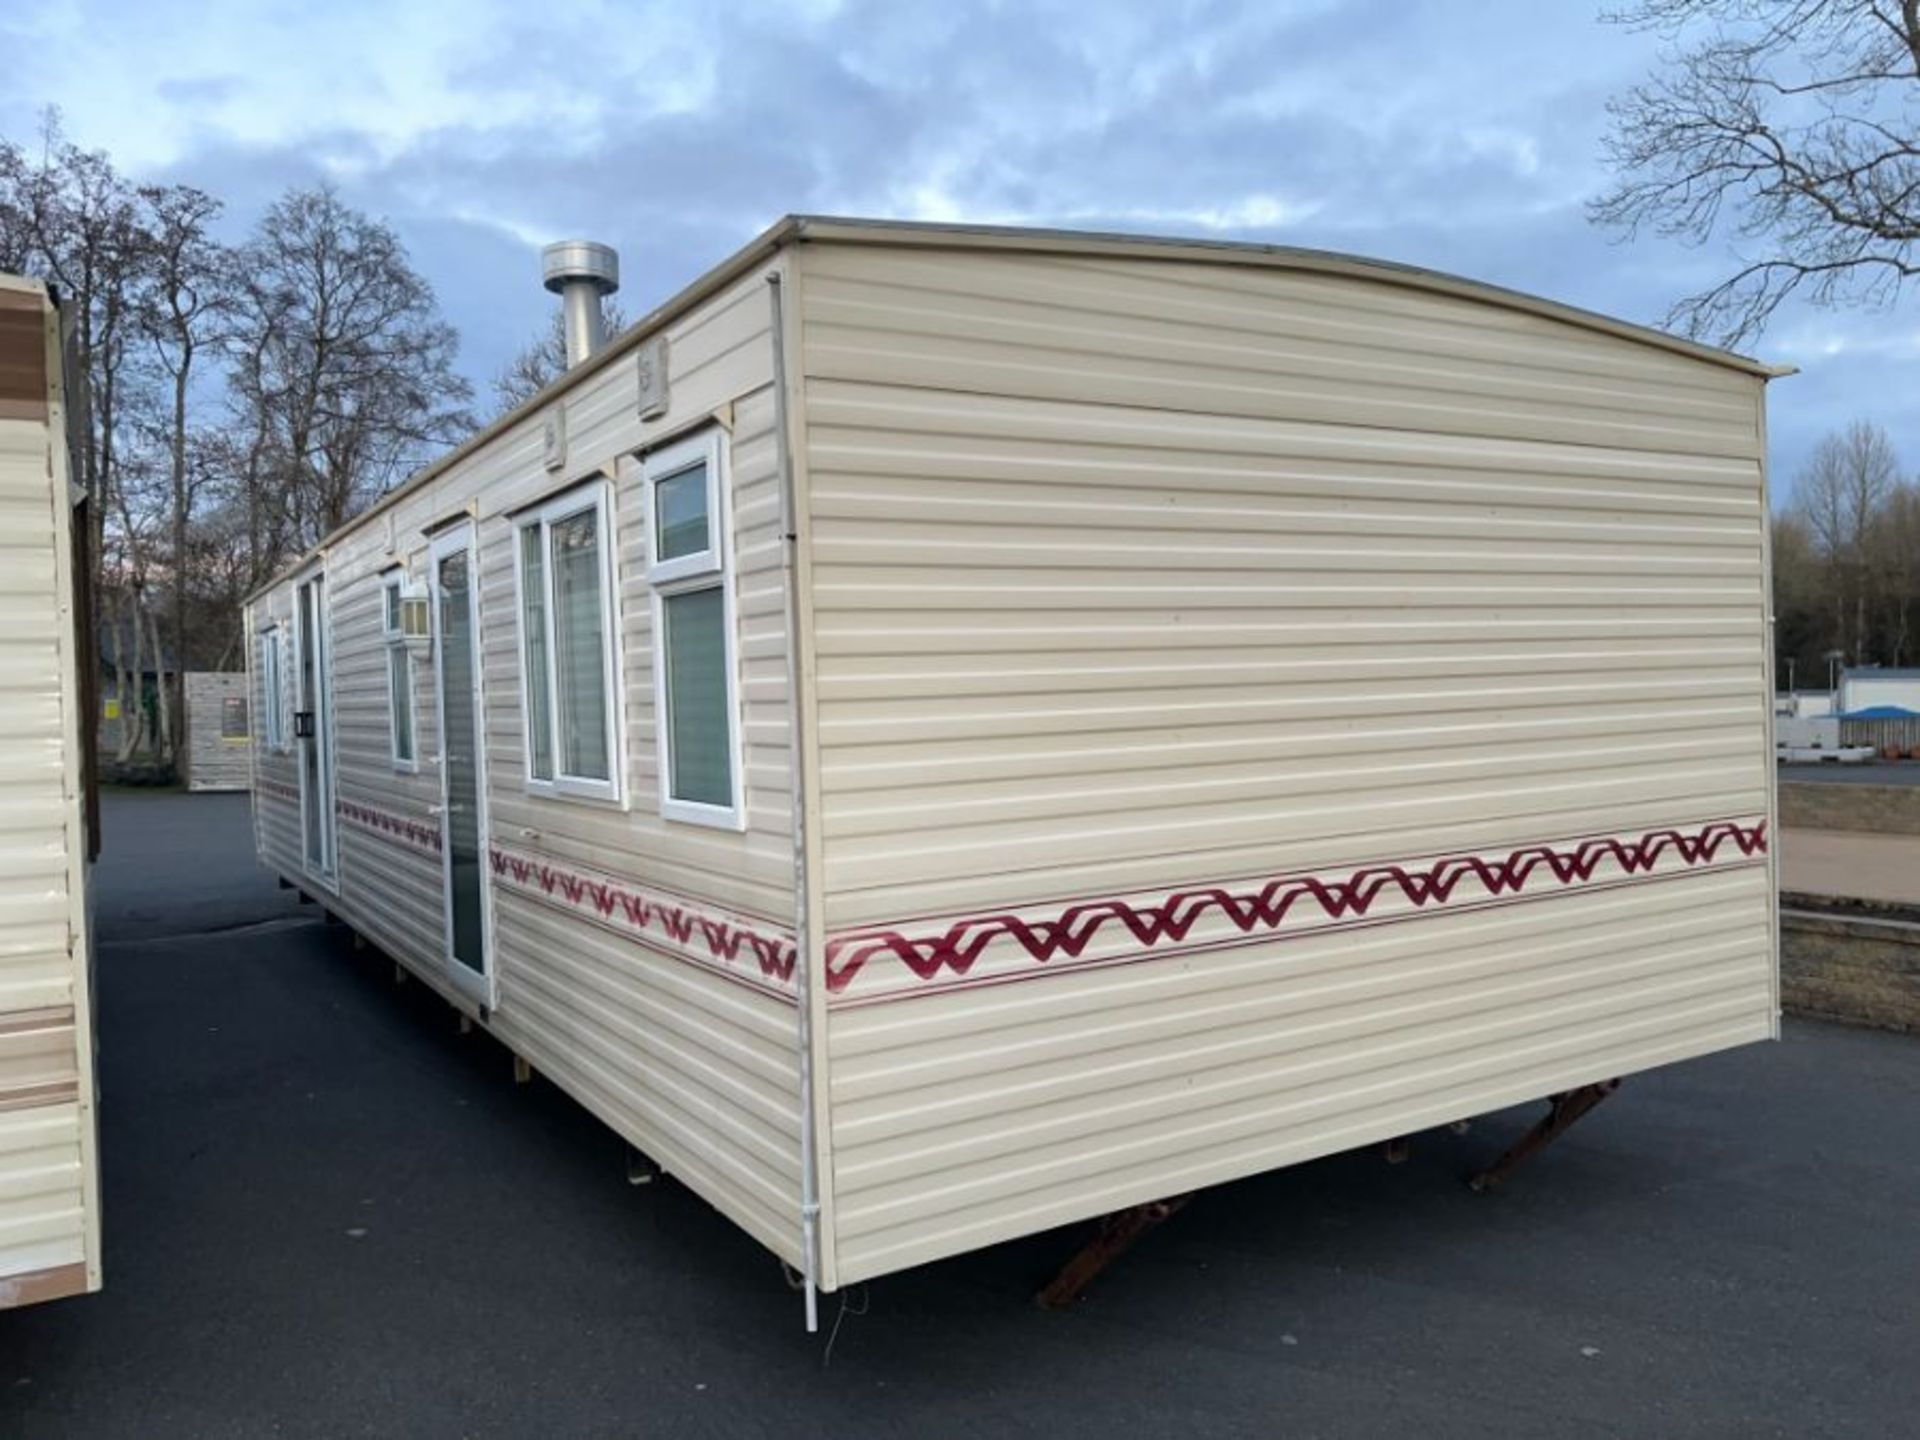 WILLERBY LYNDHURST 37FT X 12FT, 2 BEDROOM STATIC CARAVAN DOUBLE GLAZED & CENTRAL HEATING - LOCATED - Image 25 of 50